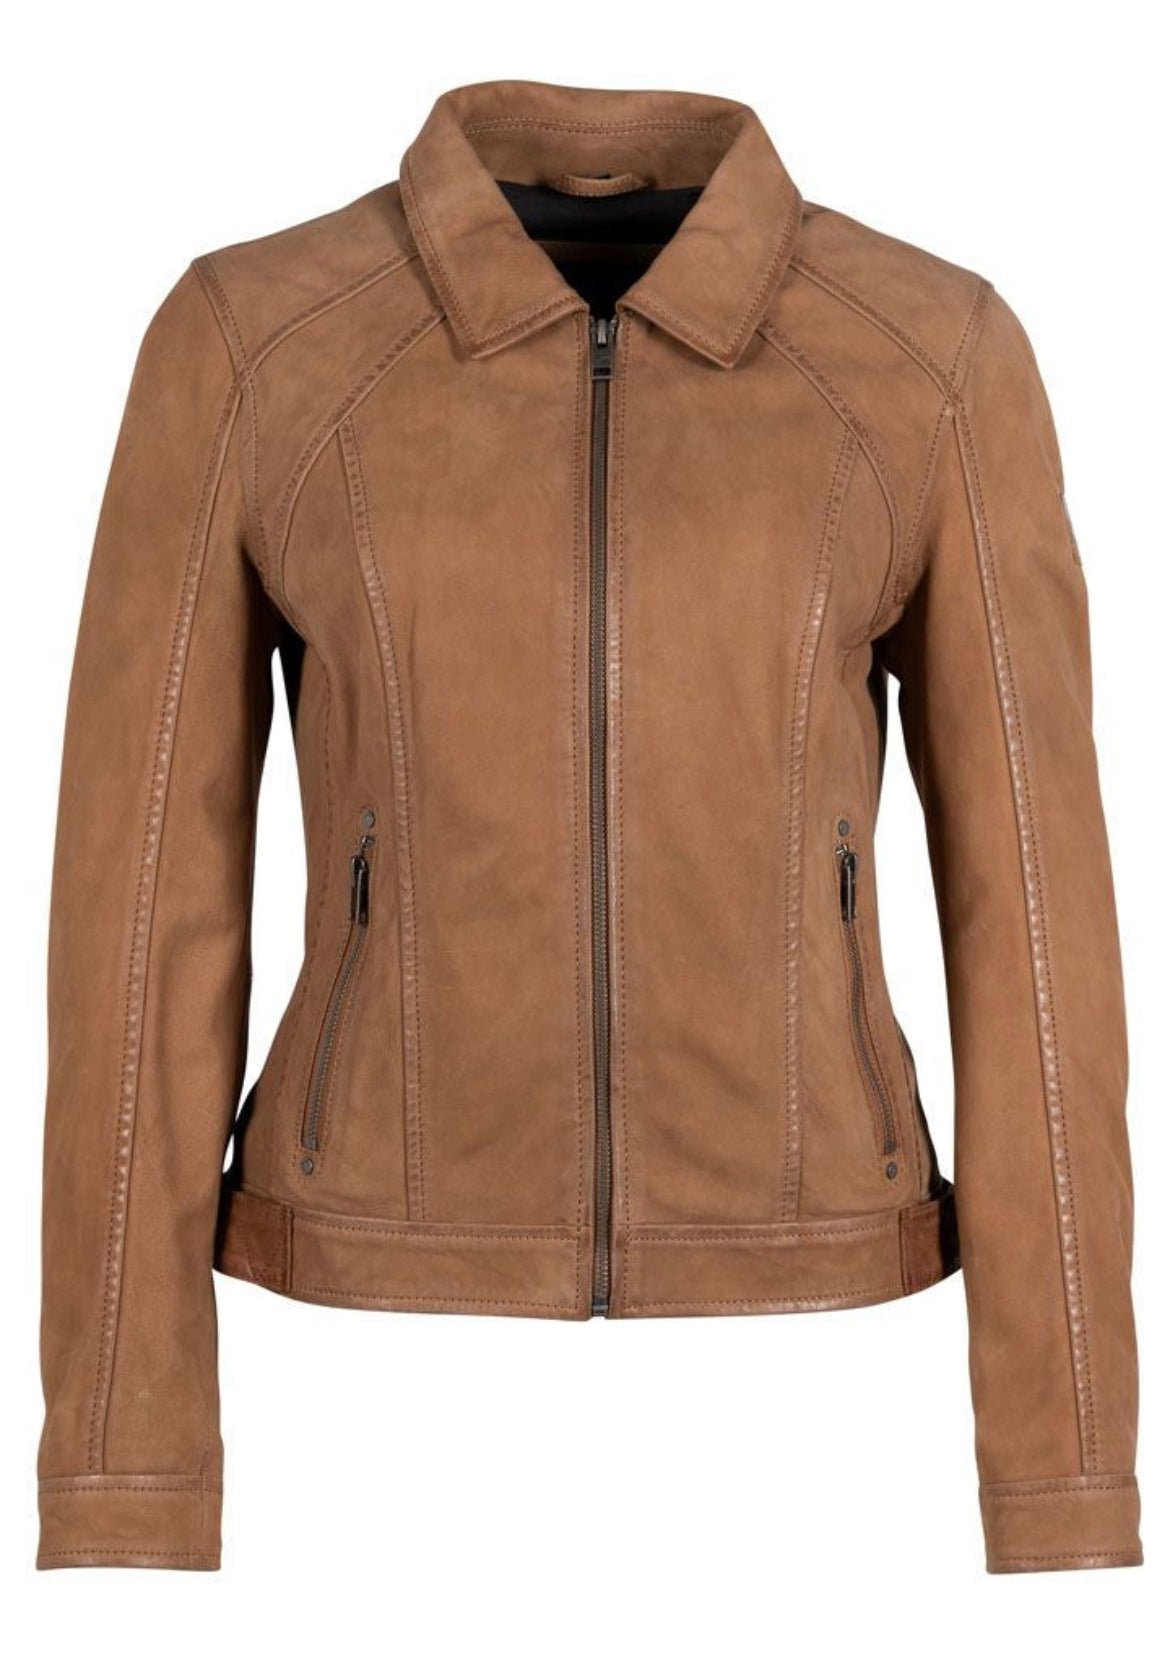 Sunny RF Leather Jacket in Cognac - Bell Creek General Store